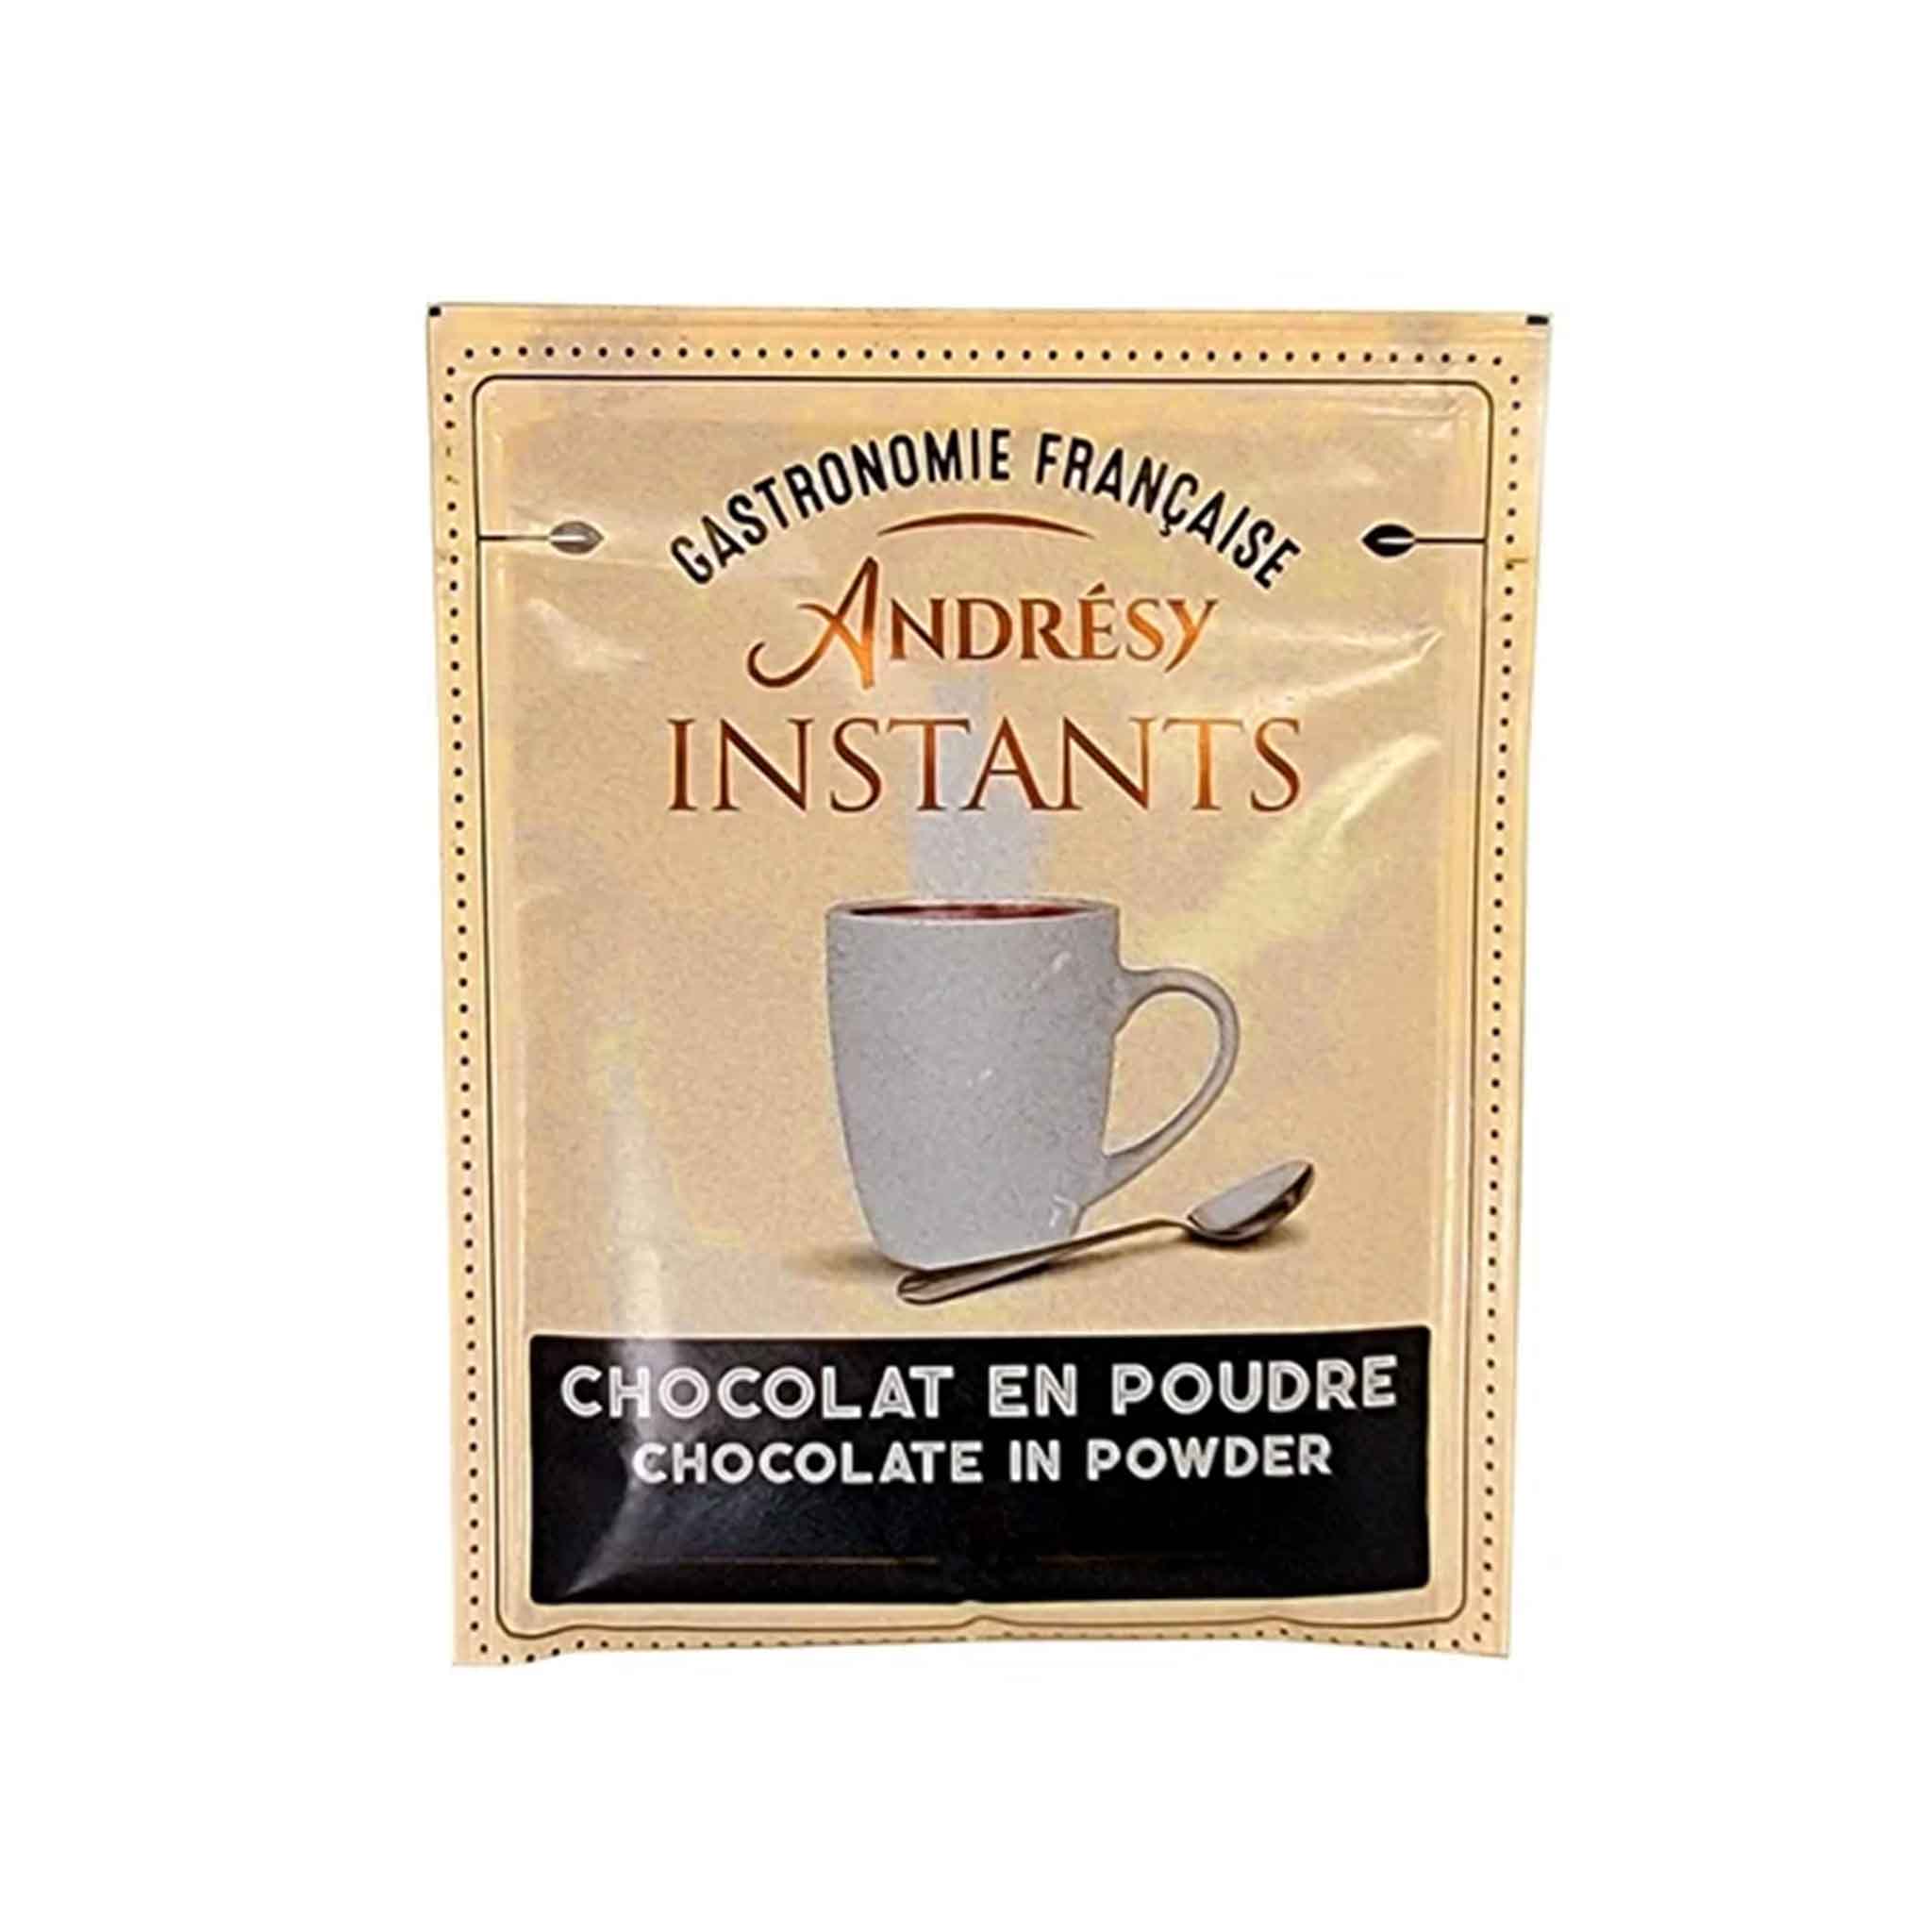 ANDRESY INSTANT HOT CHOCOLATE PACKET 20g